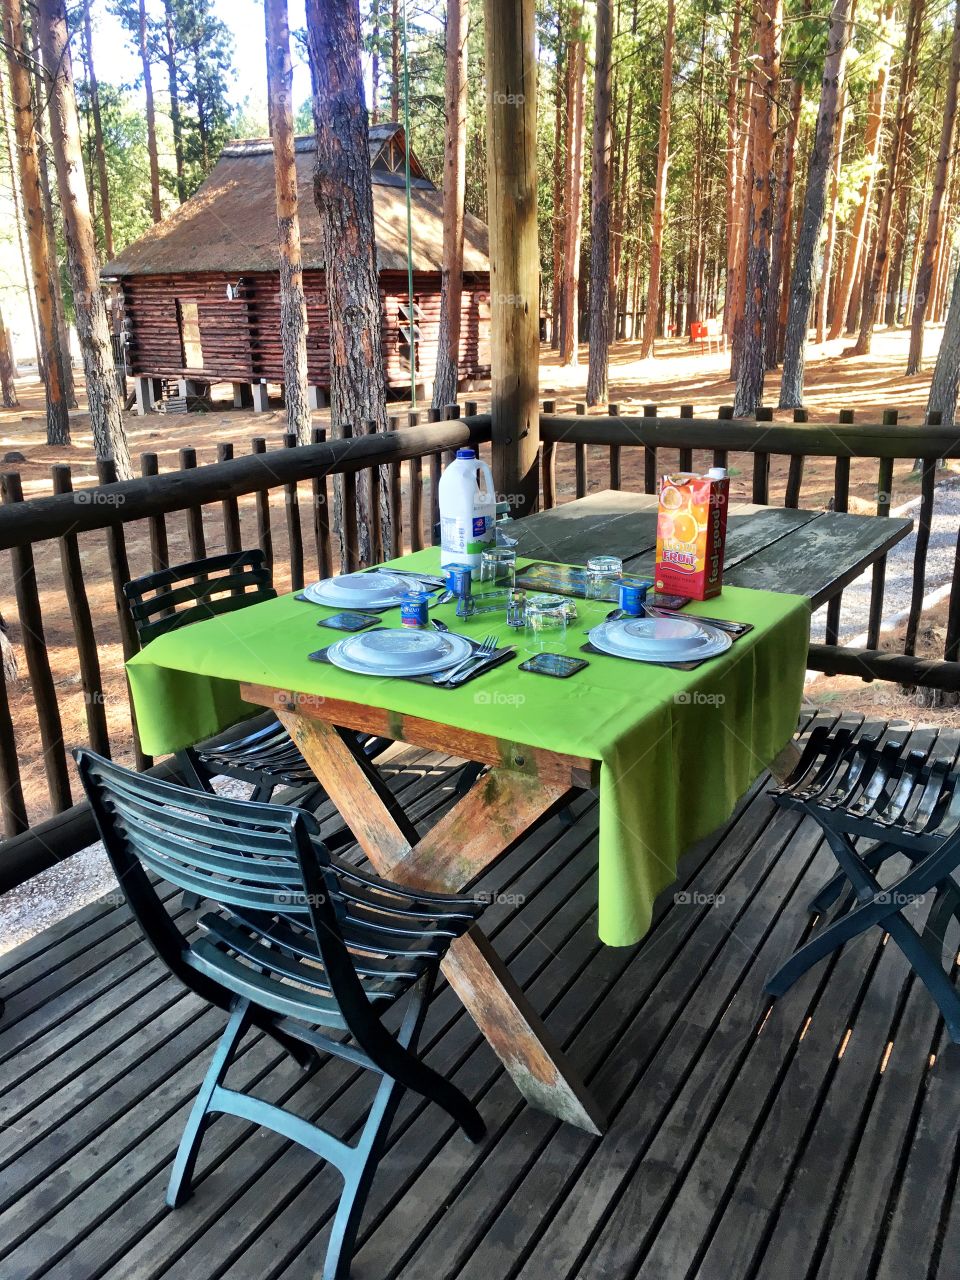 Breakfast in the forest